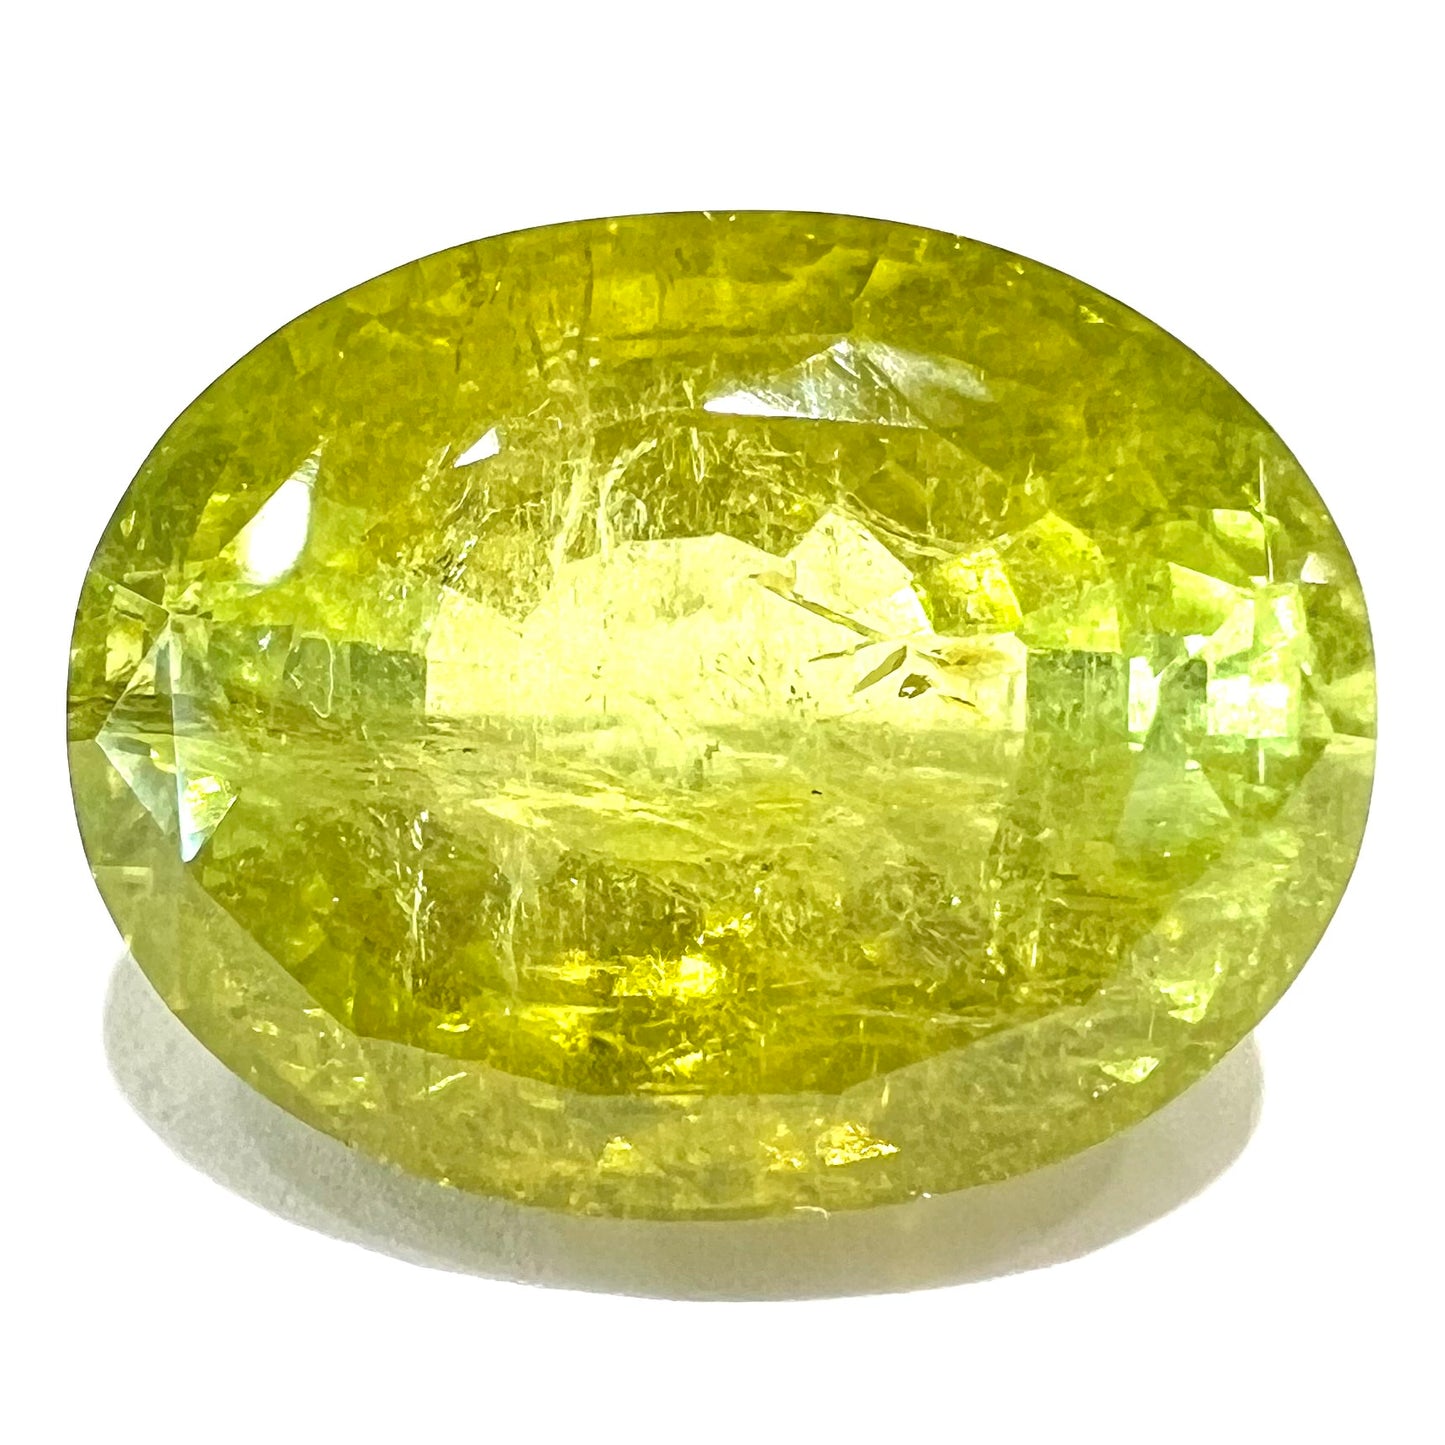 A loose, faceted oval cut green tourmaline stone.  The color is an almost neon yellow-green.